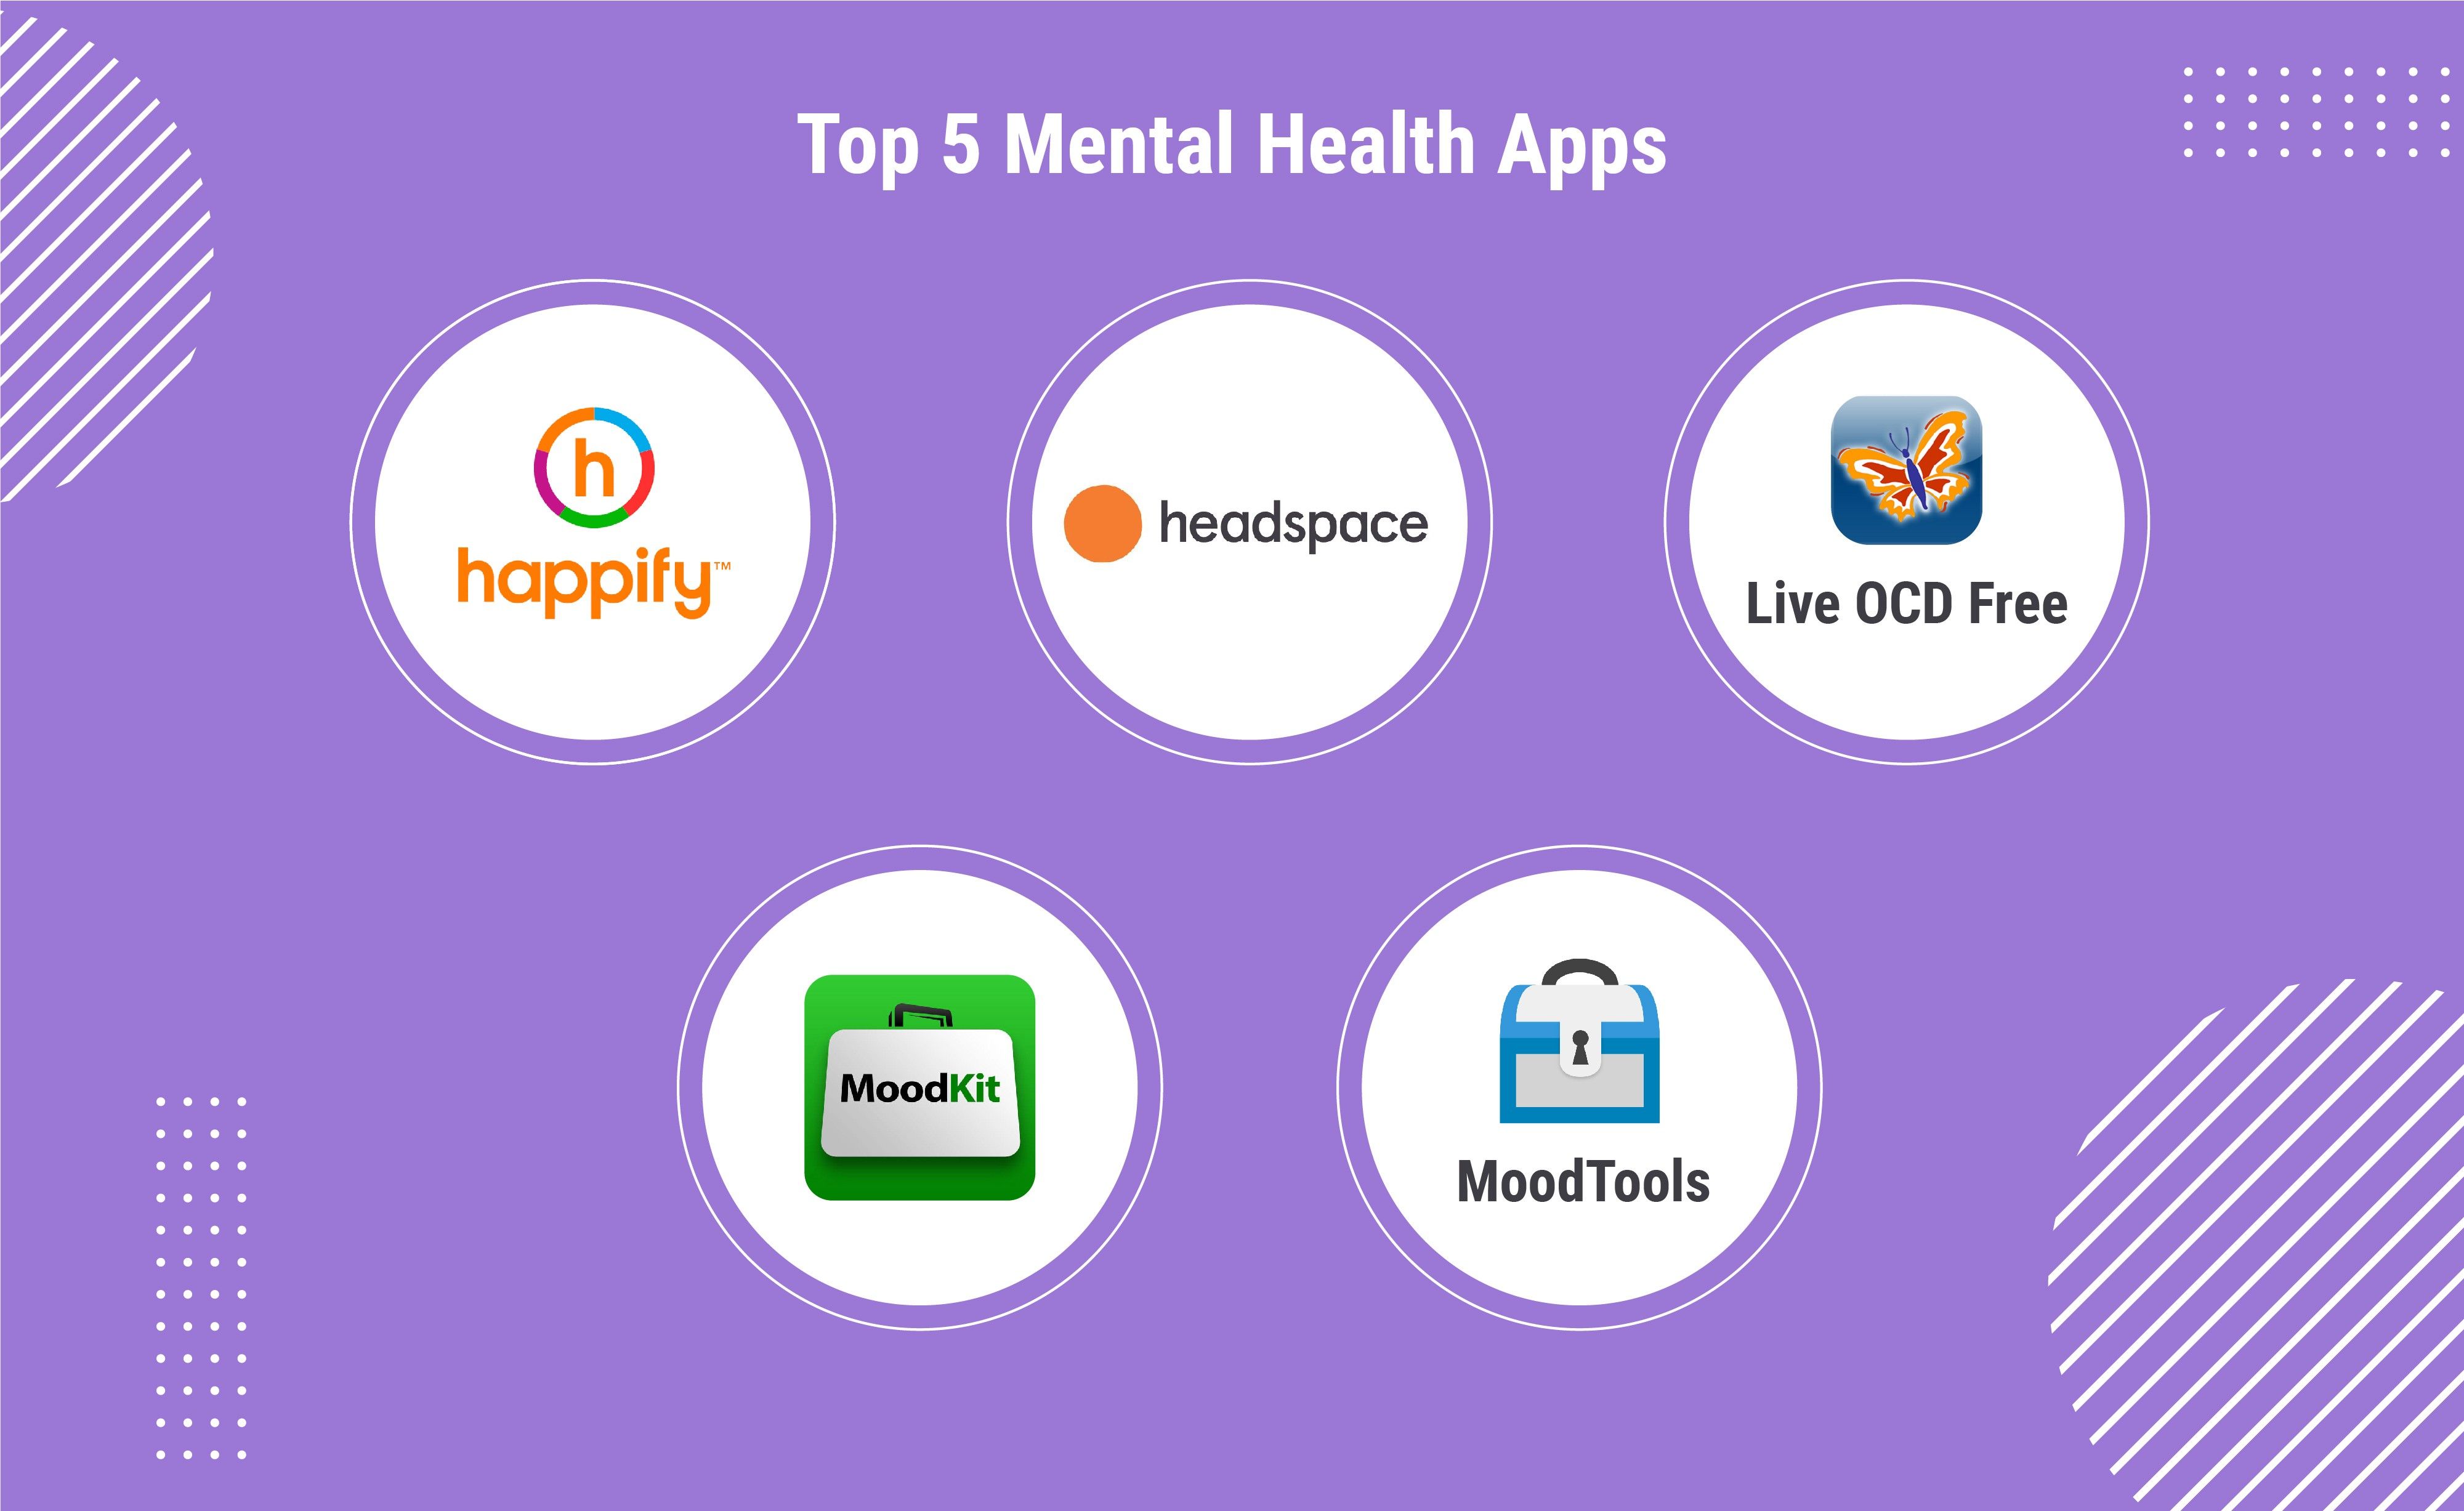 Tips to Build a Successful Mental Health App